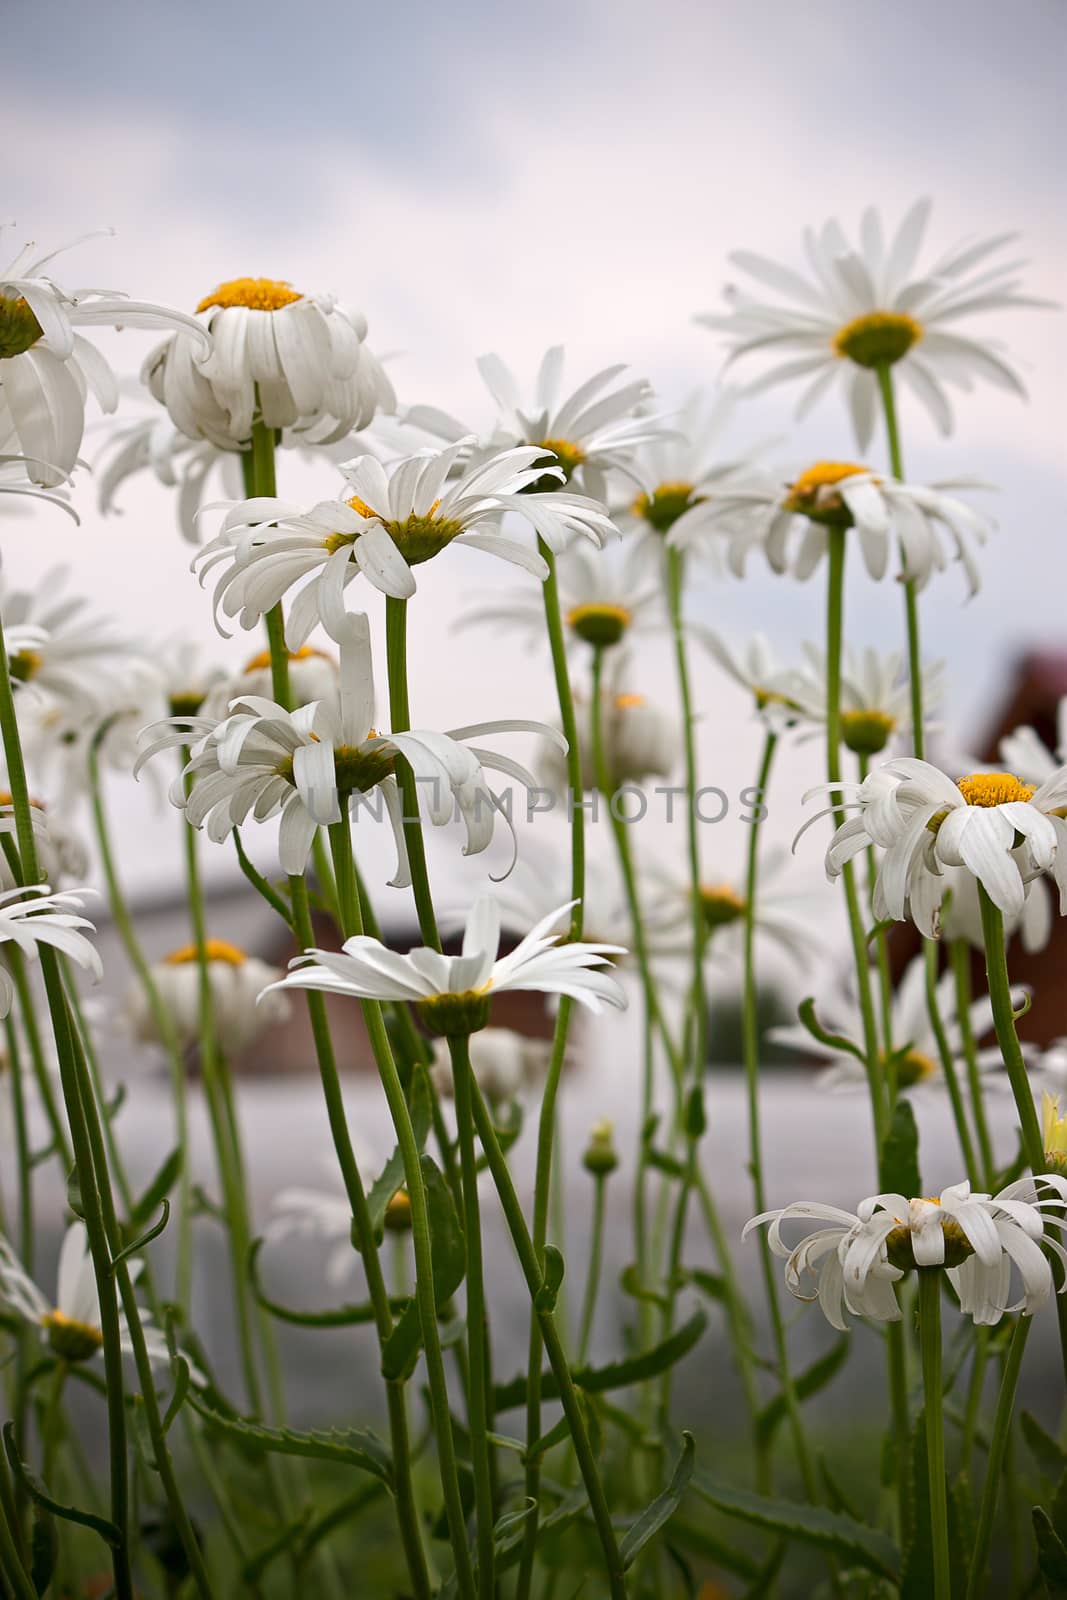 Field of daisies on  background of blue sky. Image with shallow depth of field.